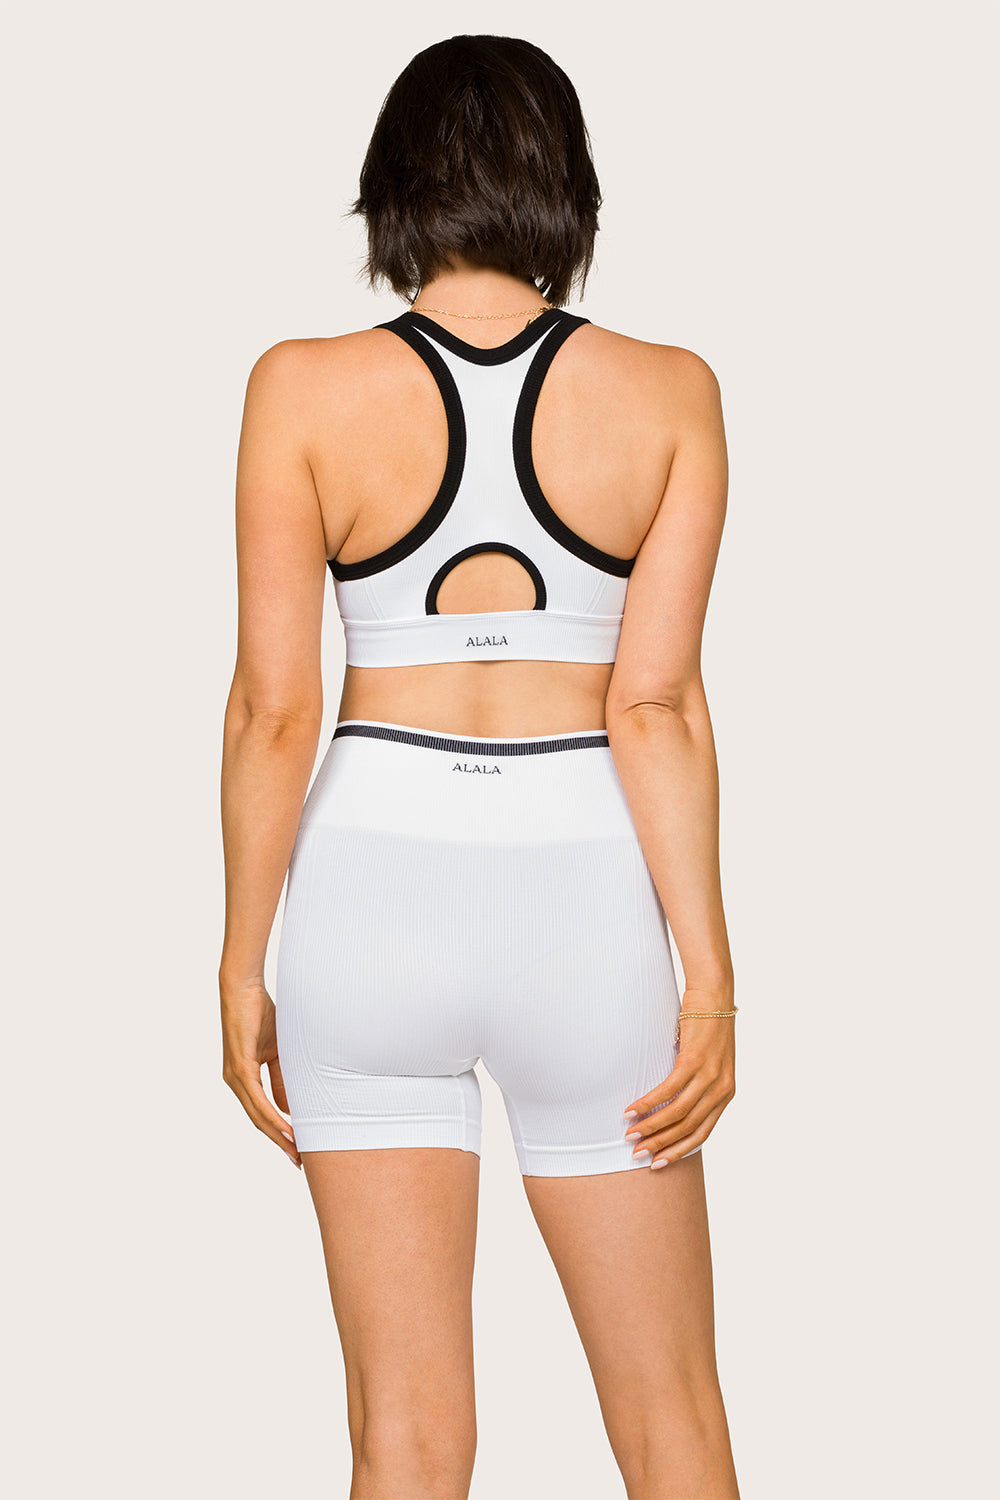 Alala women's seamless racerback bra with zipper in white with black details